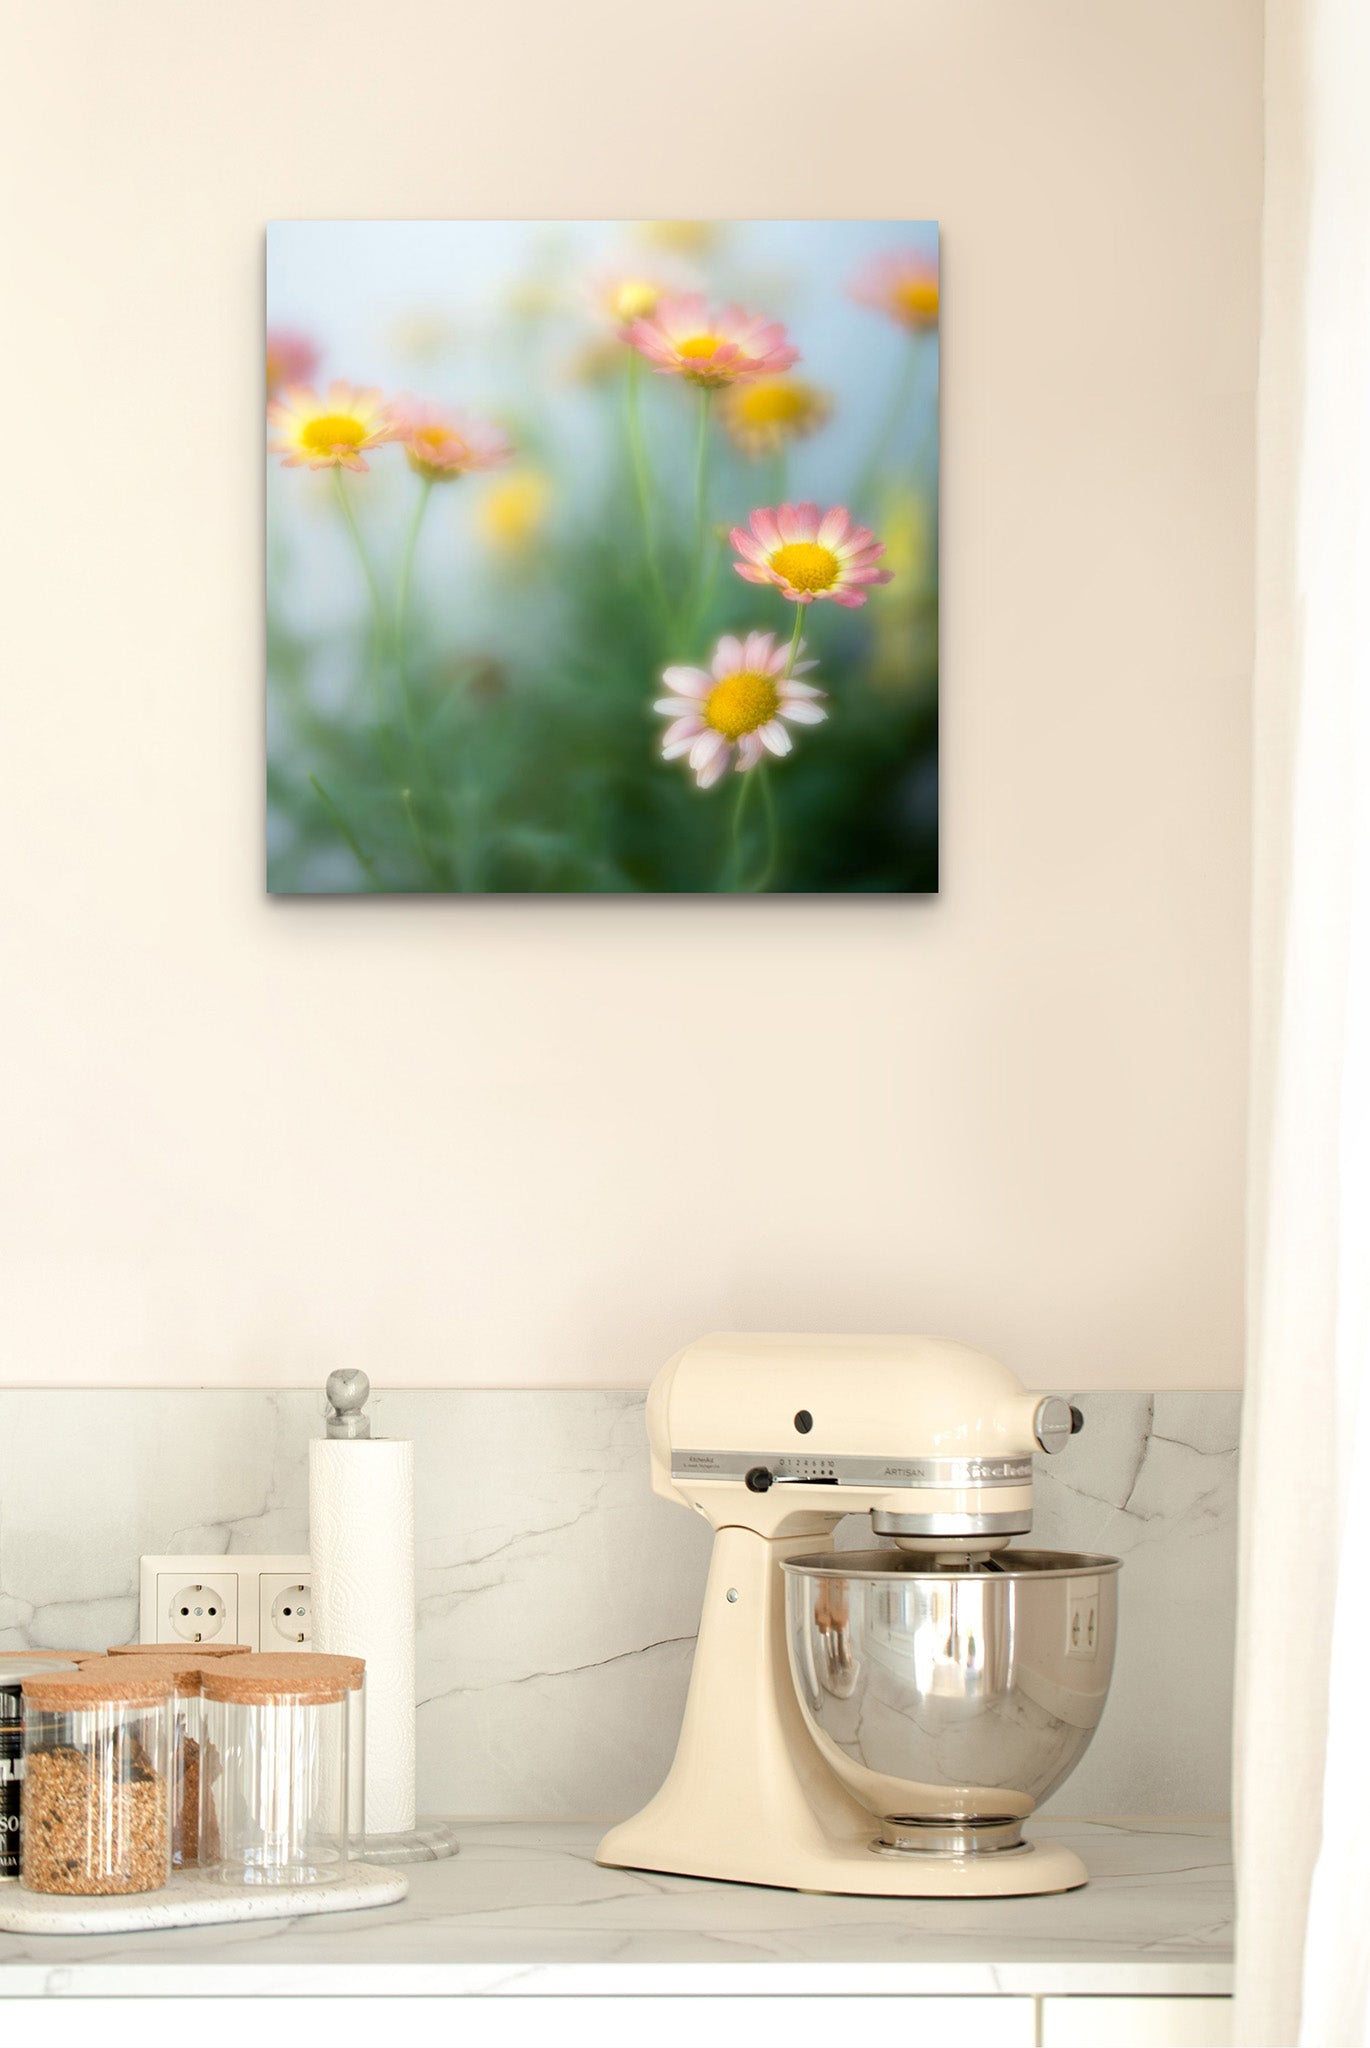 Wall in a kitchen and countertop. On the countertop, there is a stand mixer. On the wall hangs a metal print. The print hanging on the wall is a fine art photograph of pastel flowers by Cameron Dreaux. 